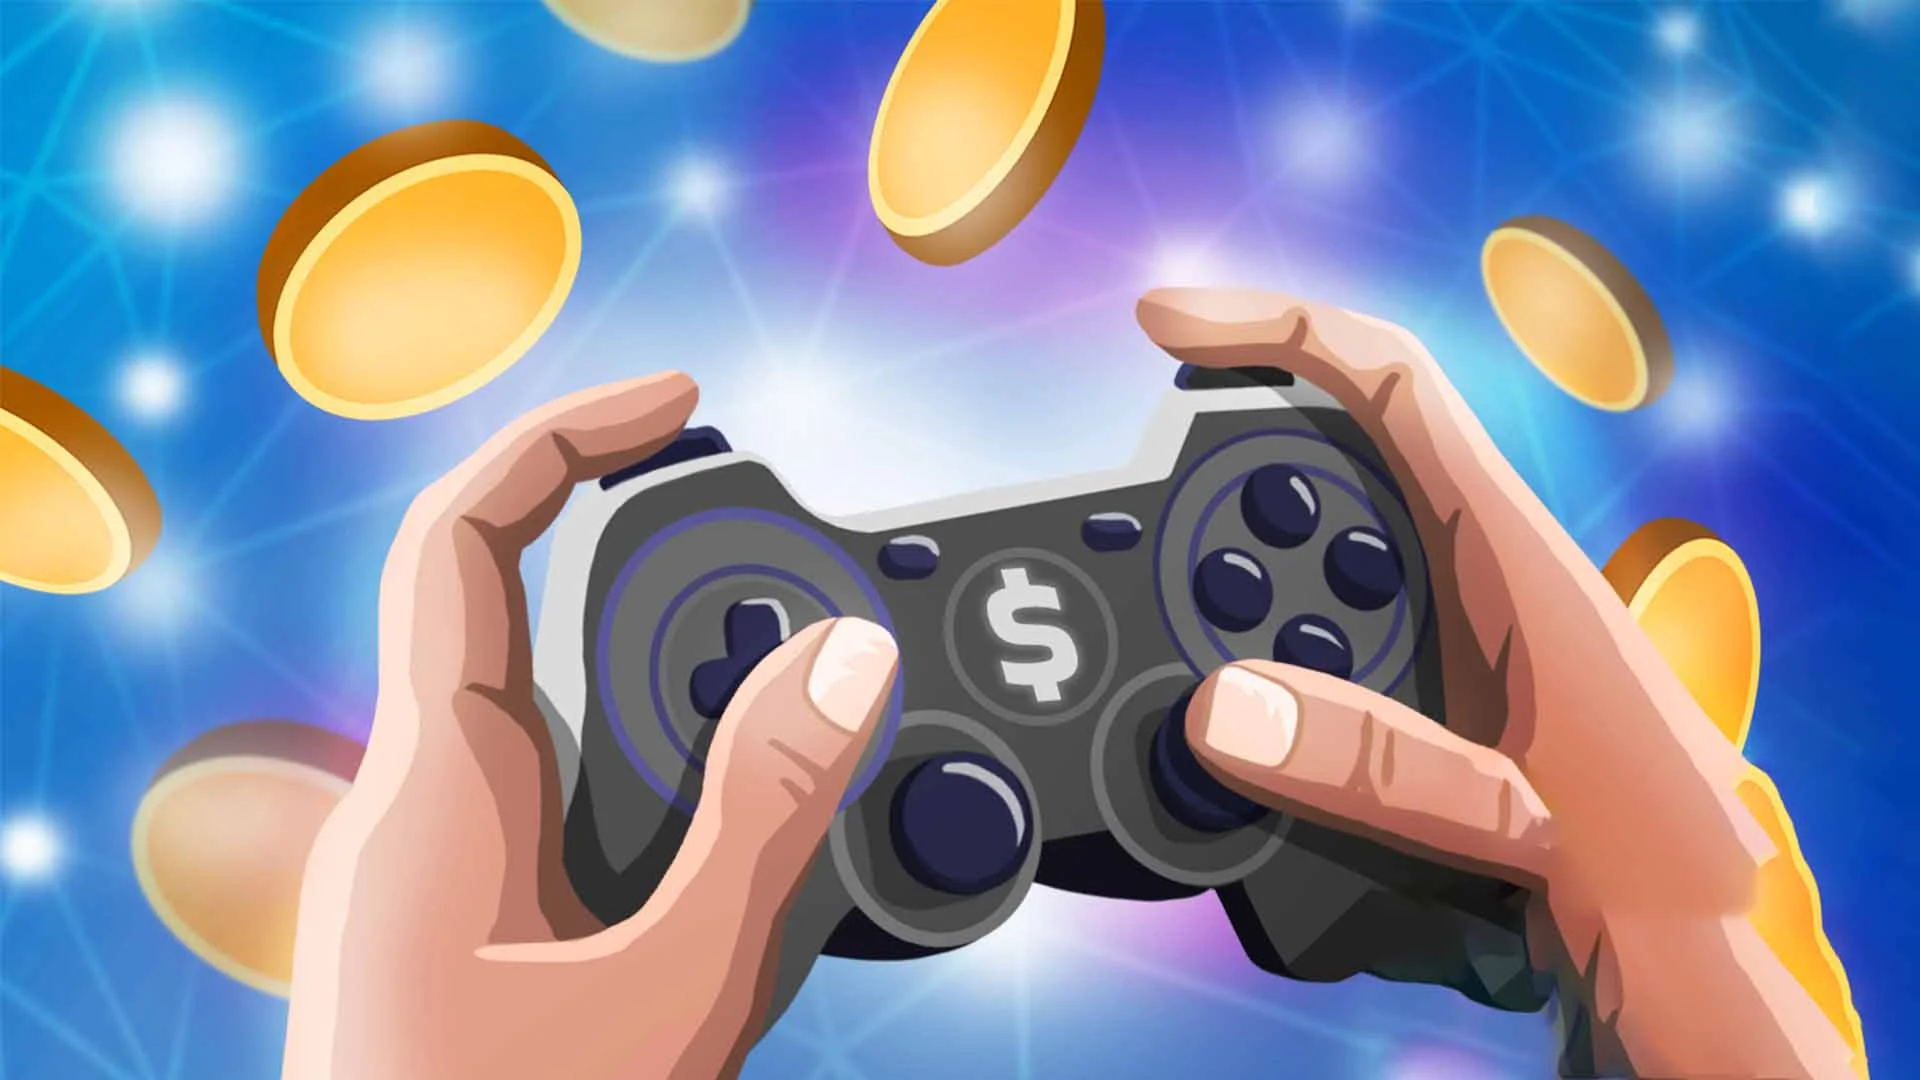 Cryptocurrencies and Gaming